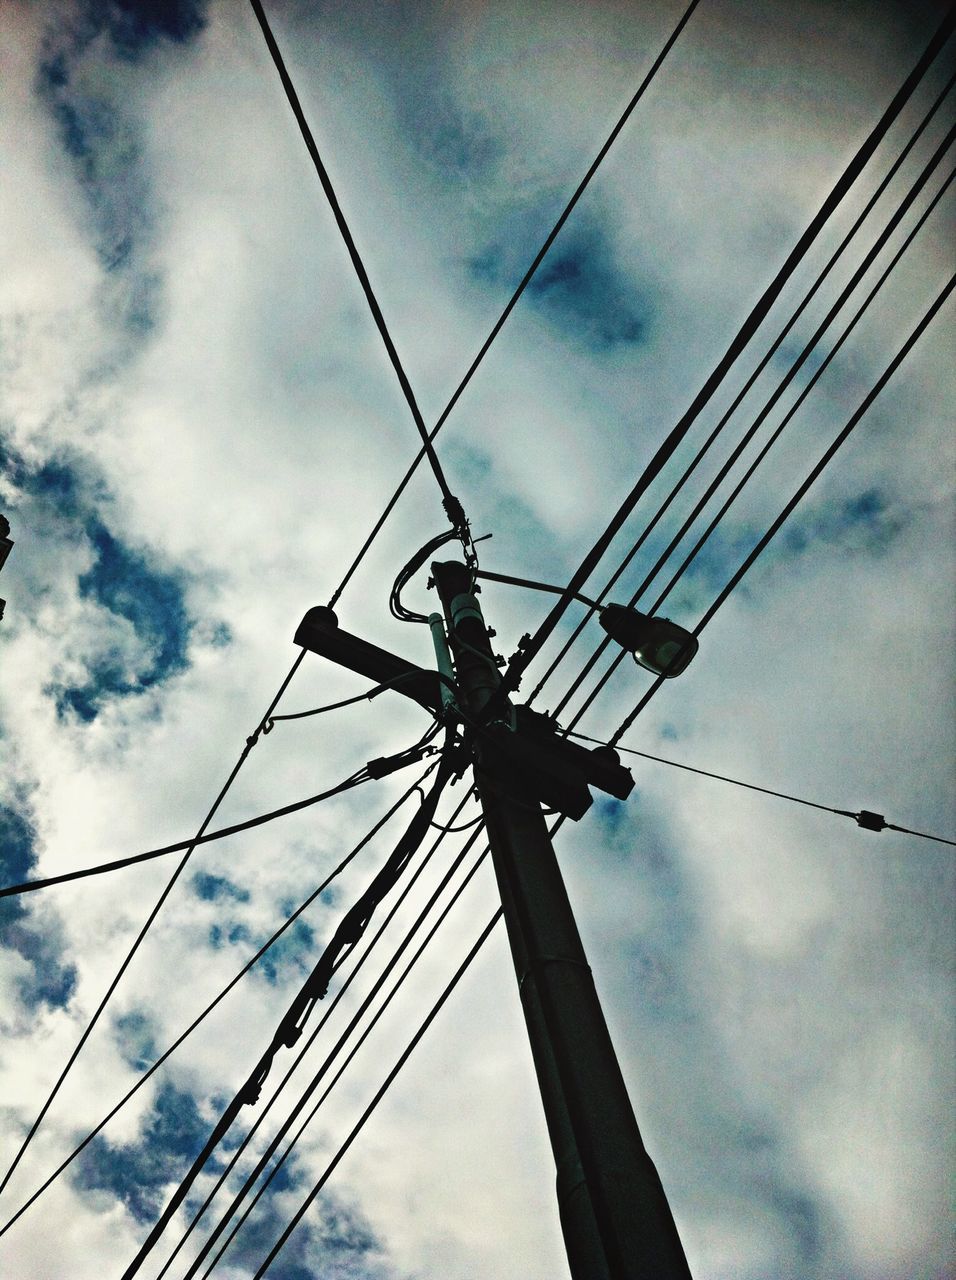 low angle view, power line, sky, power supply, connection, electricity, electricity pylon, cloud - sky, cable, fuel and power generation, cloudy, technology, cloud, complexity, built structure, no people, outdoors, day, silhouette, metal